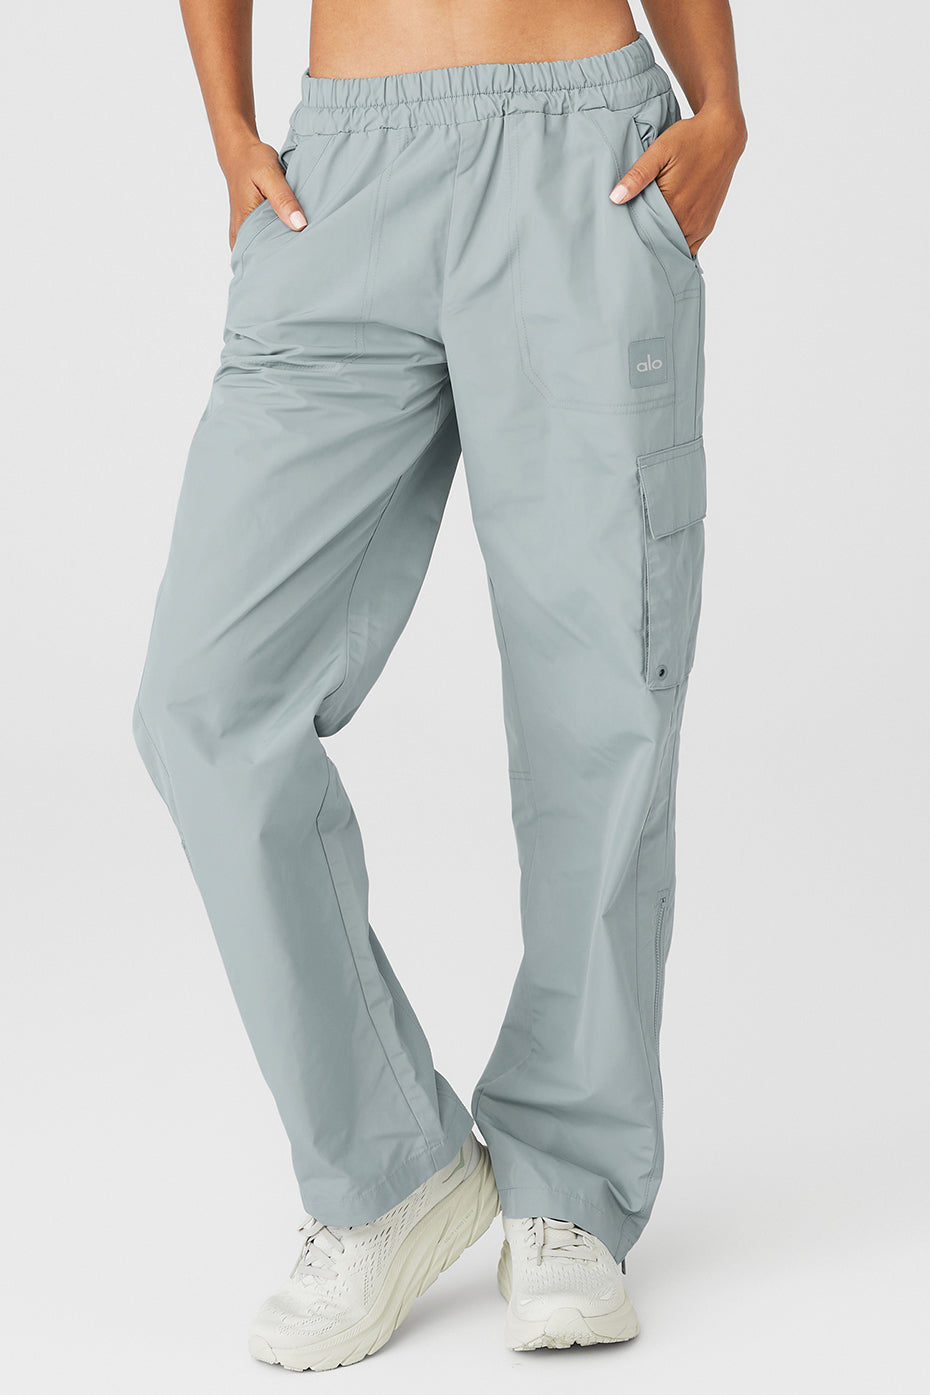 The Alo Pursuit pants are so worth it. wrinkle proof, amazing for